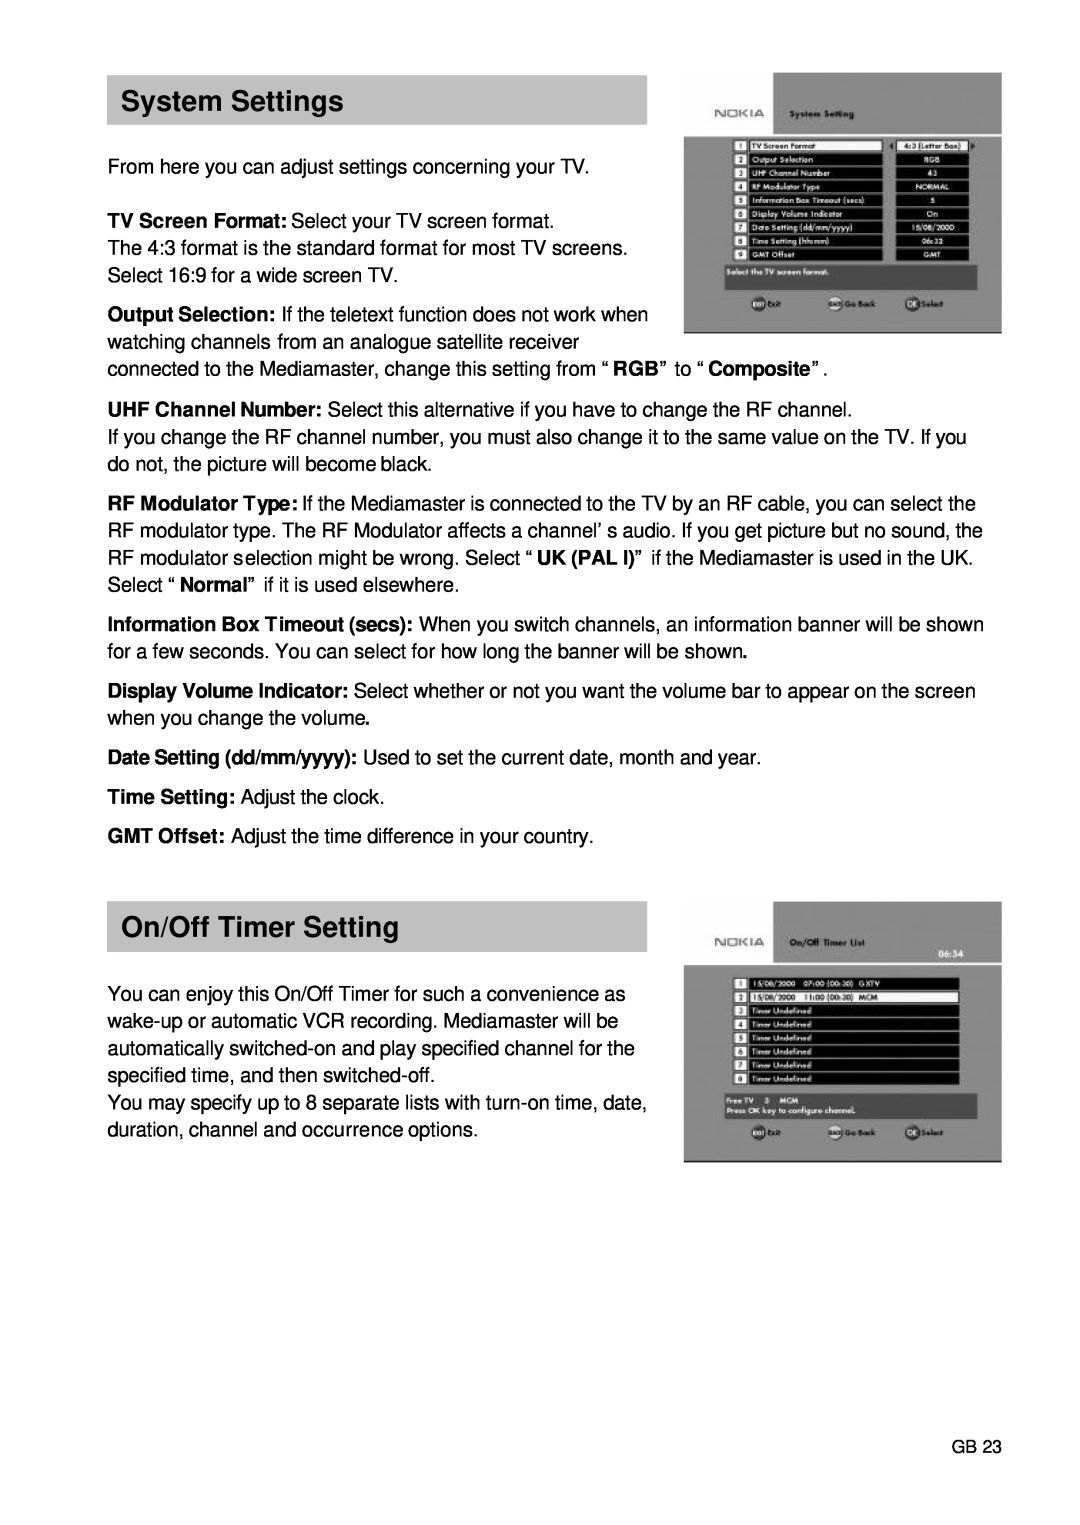 Nokia 9660S owner manual System Settings, On/Off Timer Setting 